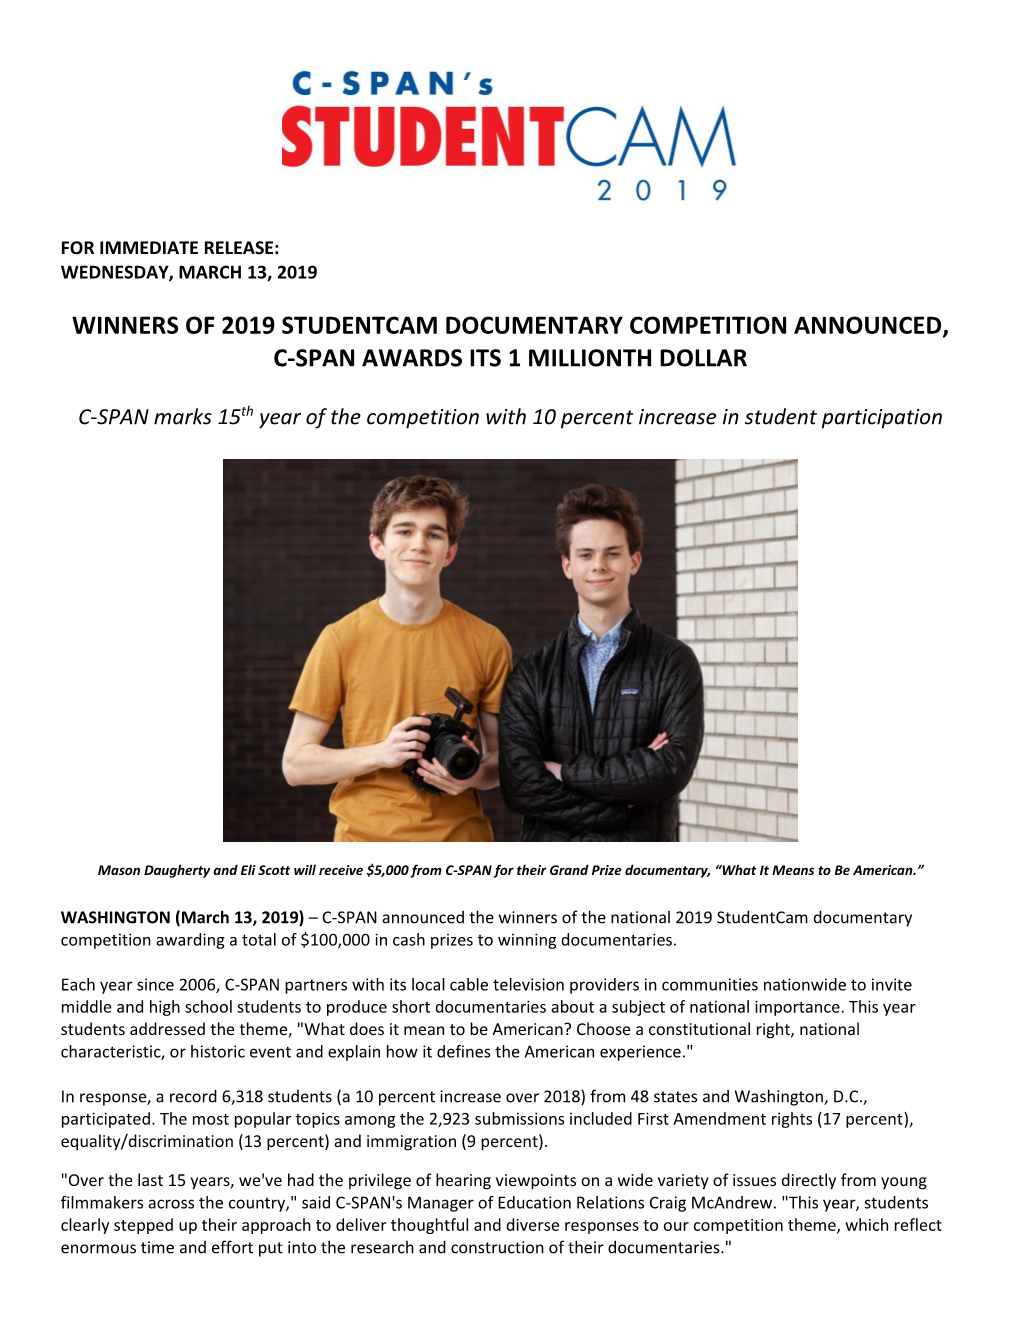 C-SPAN Announces Winners of 2019 Studentcam Documentary Competition